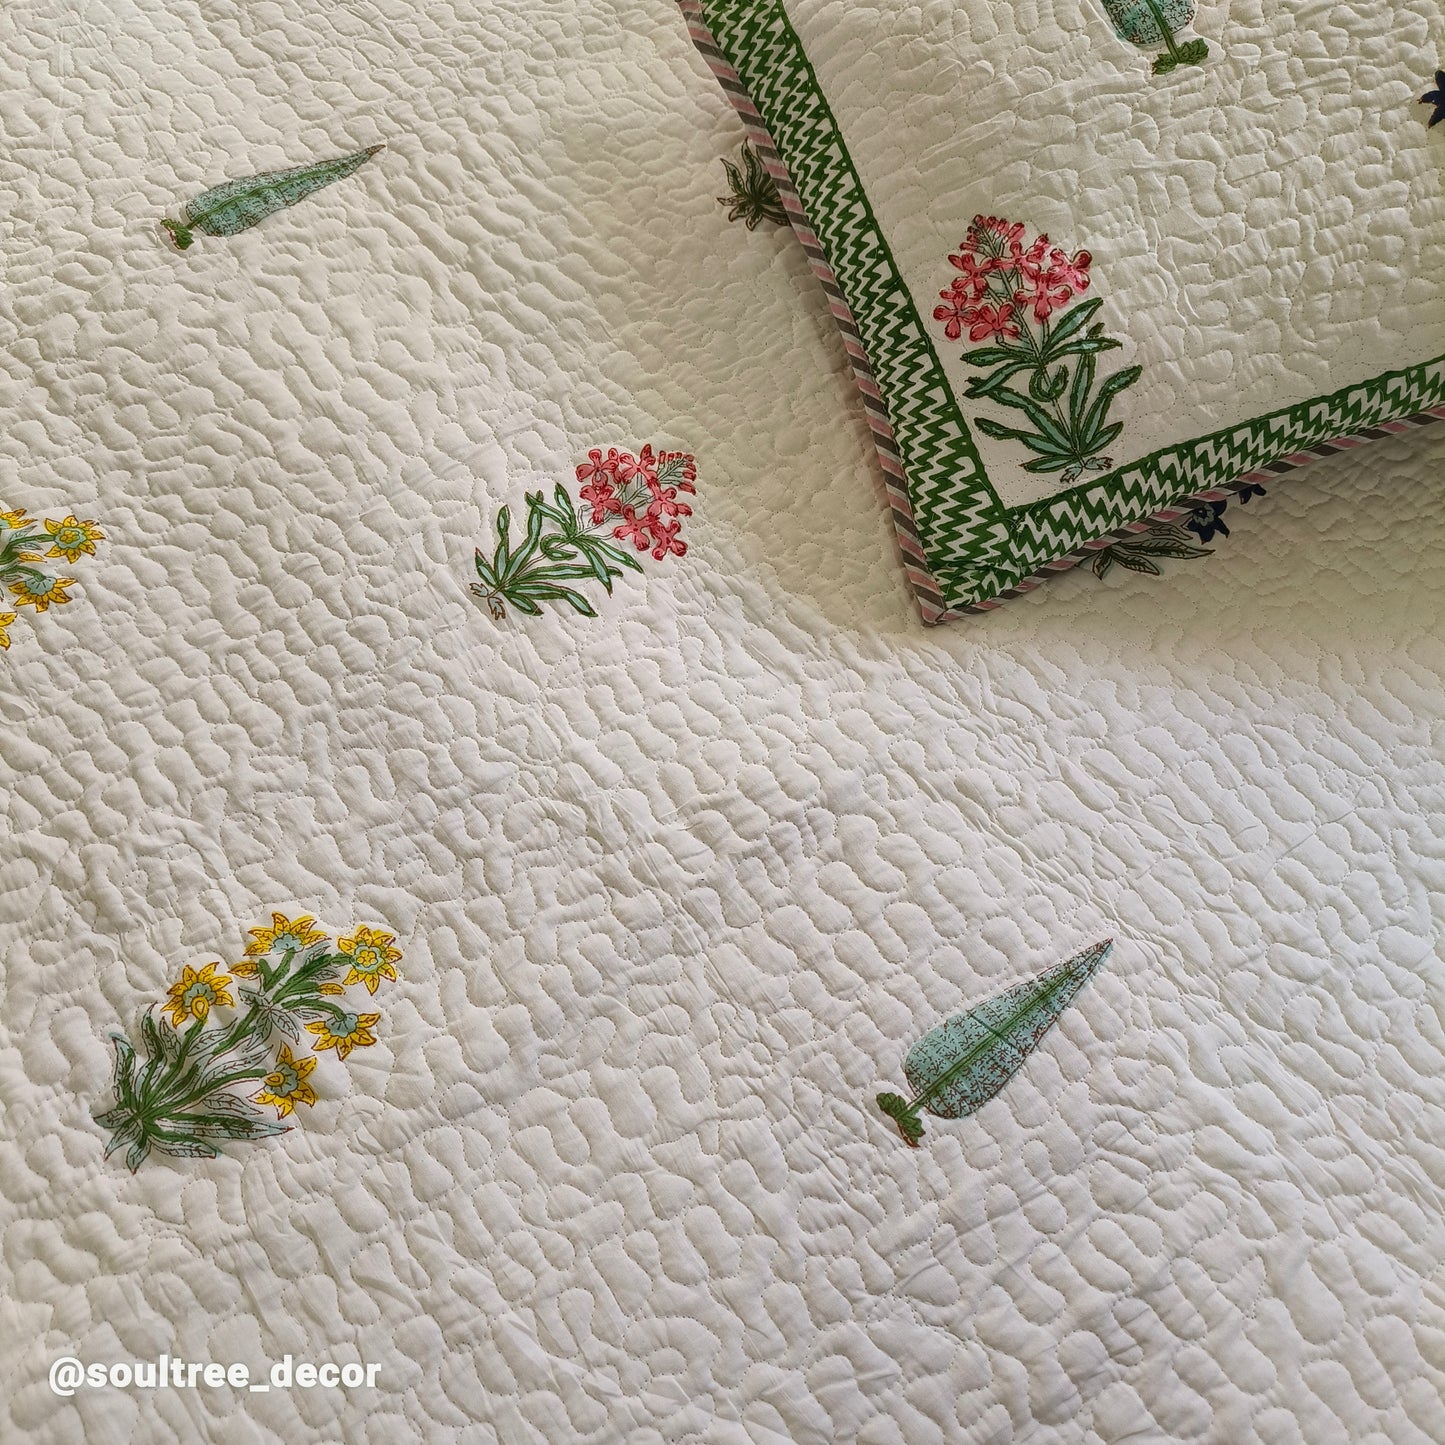 FLORAL QUILTED BEDCOVER